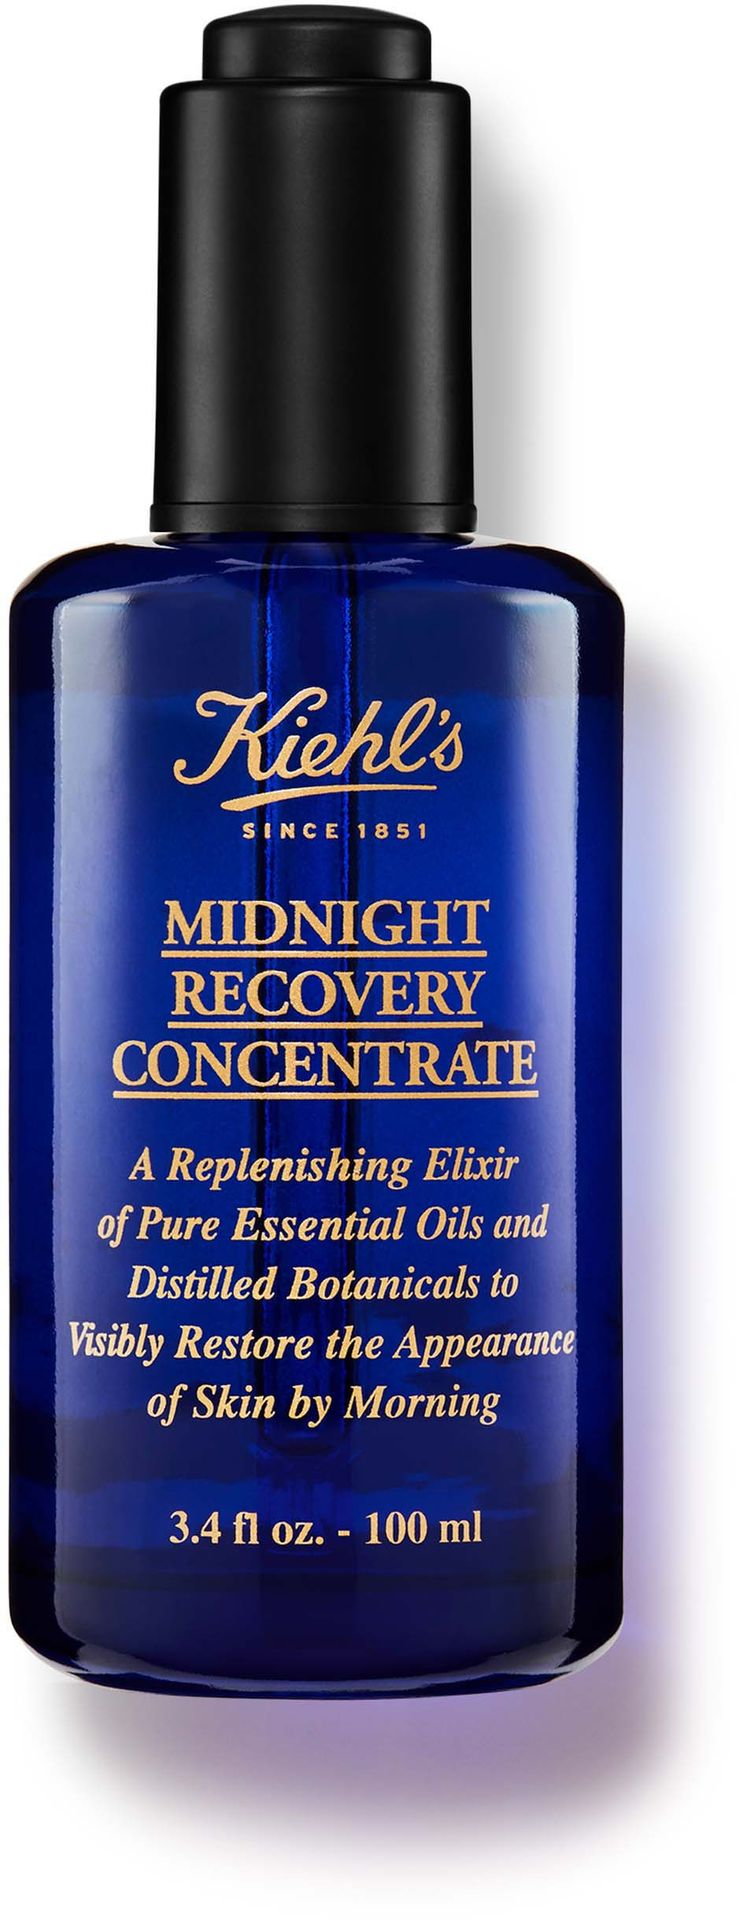 Midnight Recovery Concentrate - Serum do twarzy na noc